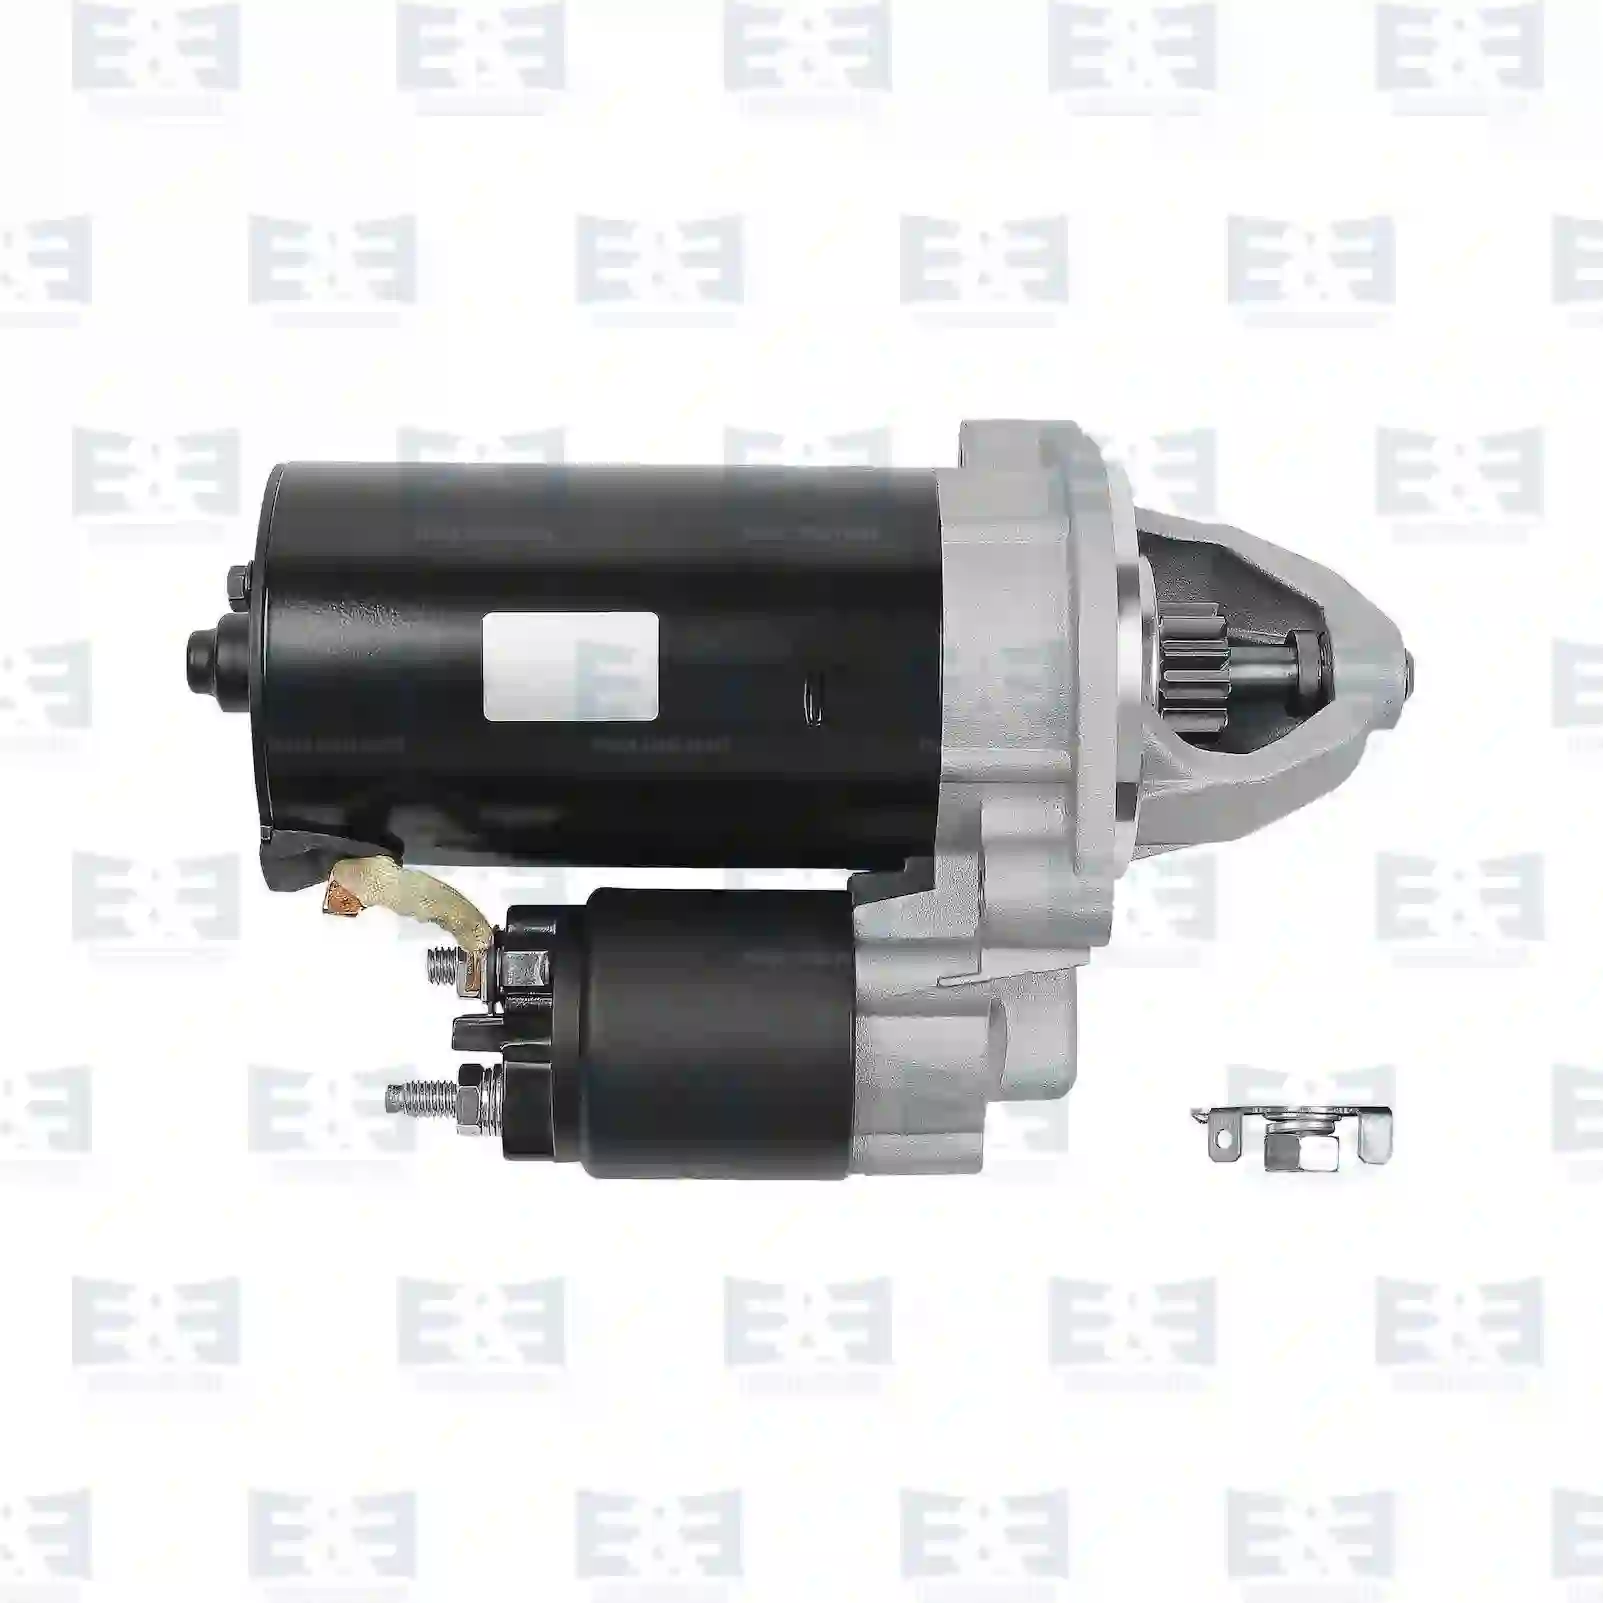 Starter Motor Starter, EE No 2E2290025 ,  oem no:5073919AA, 5103581AA, 5103581AB, 5134510AA, 5134510AB, 0041513501, 0041517001, 6611513101, 6611513701, 1516655, 1516671, 1516735, 031114040, 031114041, SS399, SS457, SS850, 0031515001, 0041514501, 0041516501, 0041517001, 0031512901, 0031515001, 003151500180, 0031517001, 0031519801, 0041512101, 0041513001, 0041513501, 0041514401, 0041514501, 0041515101, 0041515201, 0041515601, 0041516301, 0041516501, 0041516601, 0041516701, 0041517001, 0041517101, 0041517901, 0041518901, 004151890180, 0041519201, 004151920180, 0041519701, 0051511301, 005151130180, 0051512901, 0051516601, 005151660180, 005151660180RW, 005151660180TP, 0061513201, 0071518901, 0071519201, 1621513001, 6611513101, 6611513501, 0041513501, 0041517001, 6611513101, 6611513201, 6611513401, 6611513501, 6611513701, 6611513801, 6611513901, 0041517101 E&E Truck Spare Parts | Truck Spare Parts, Auotomotive Spare Parts